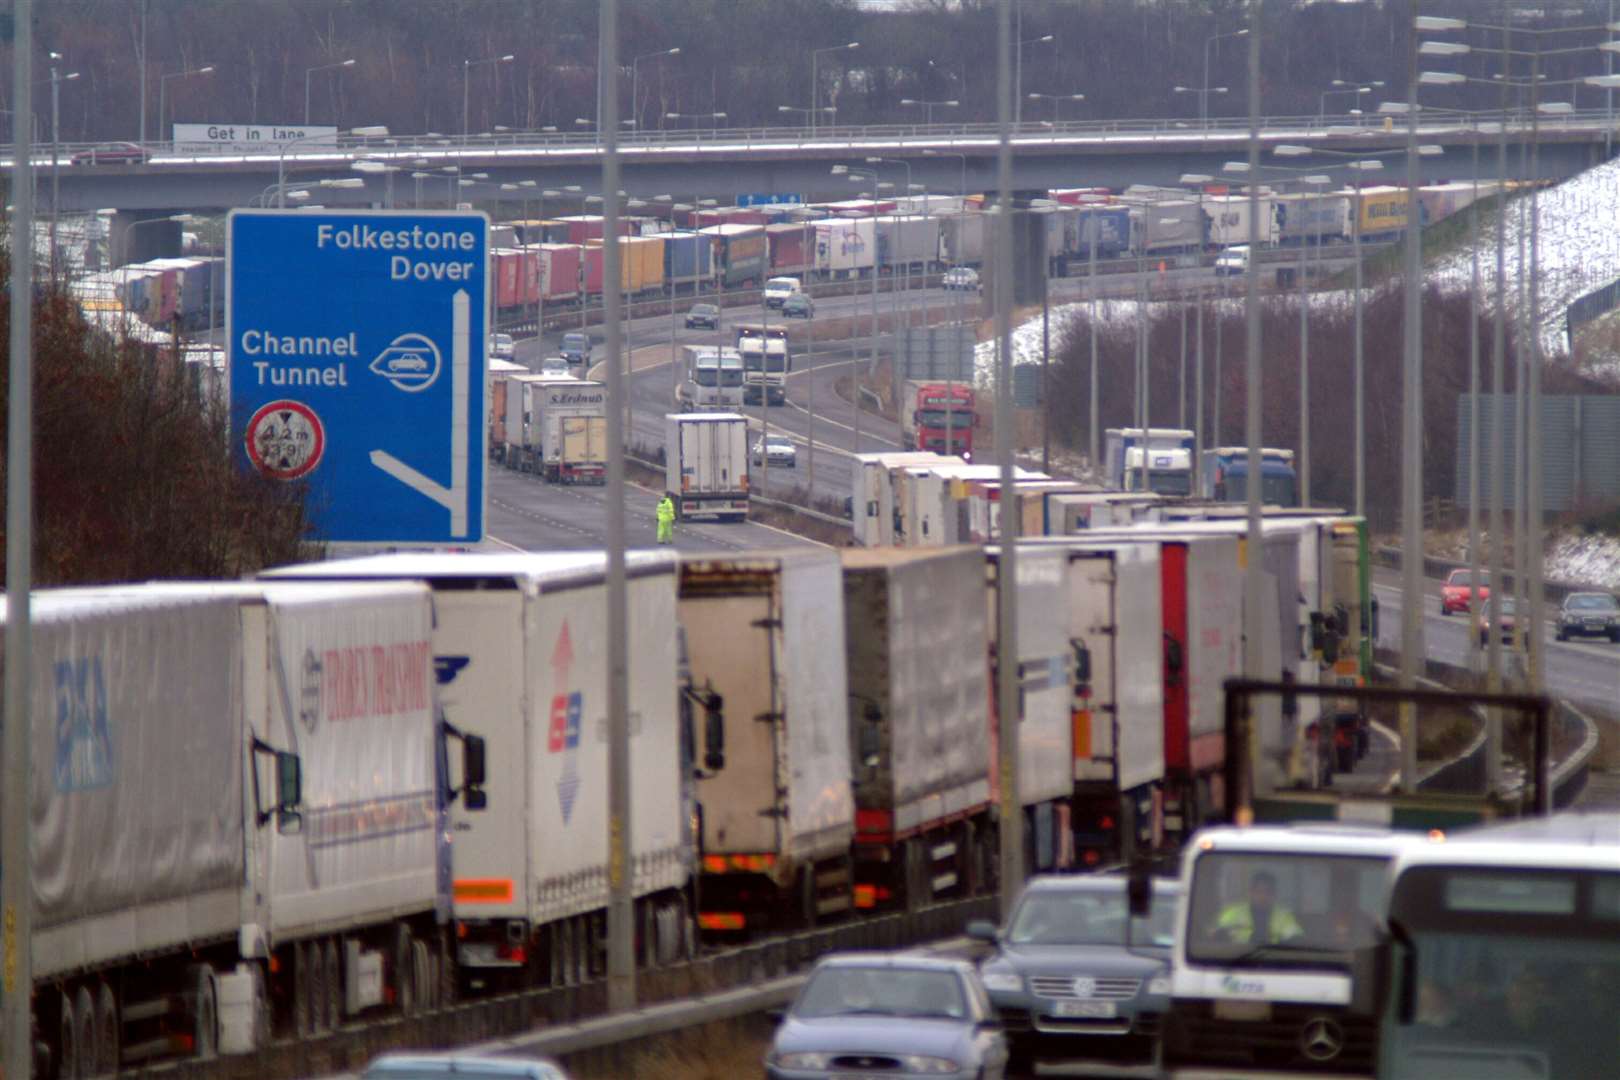 There are concerns delays at the port of Dover could increase as more freight traffic gets back on the roads